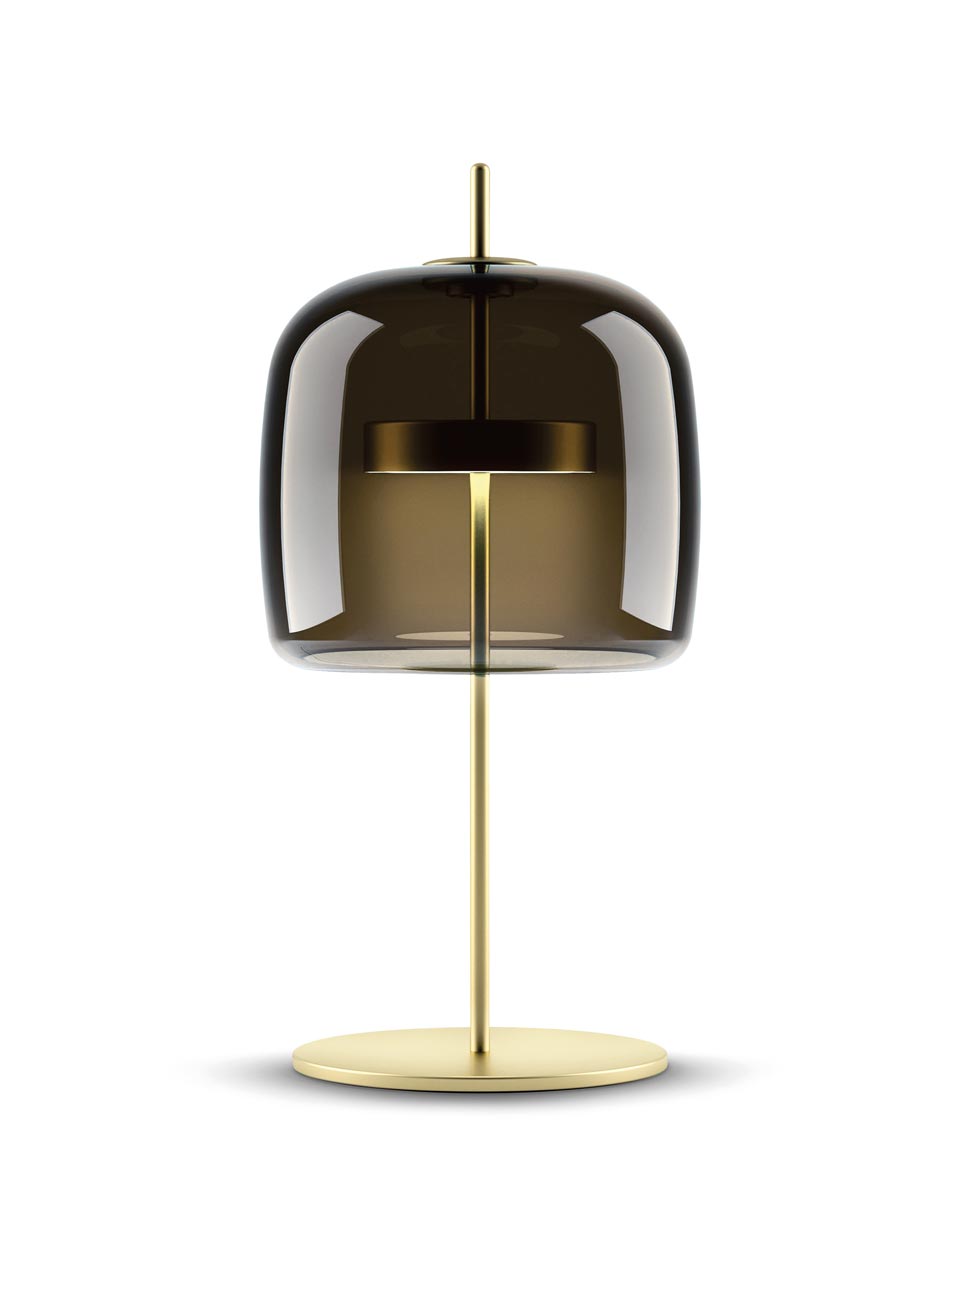 large gold table lamp